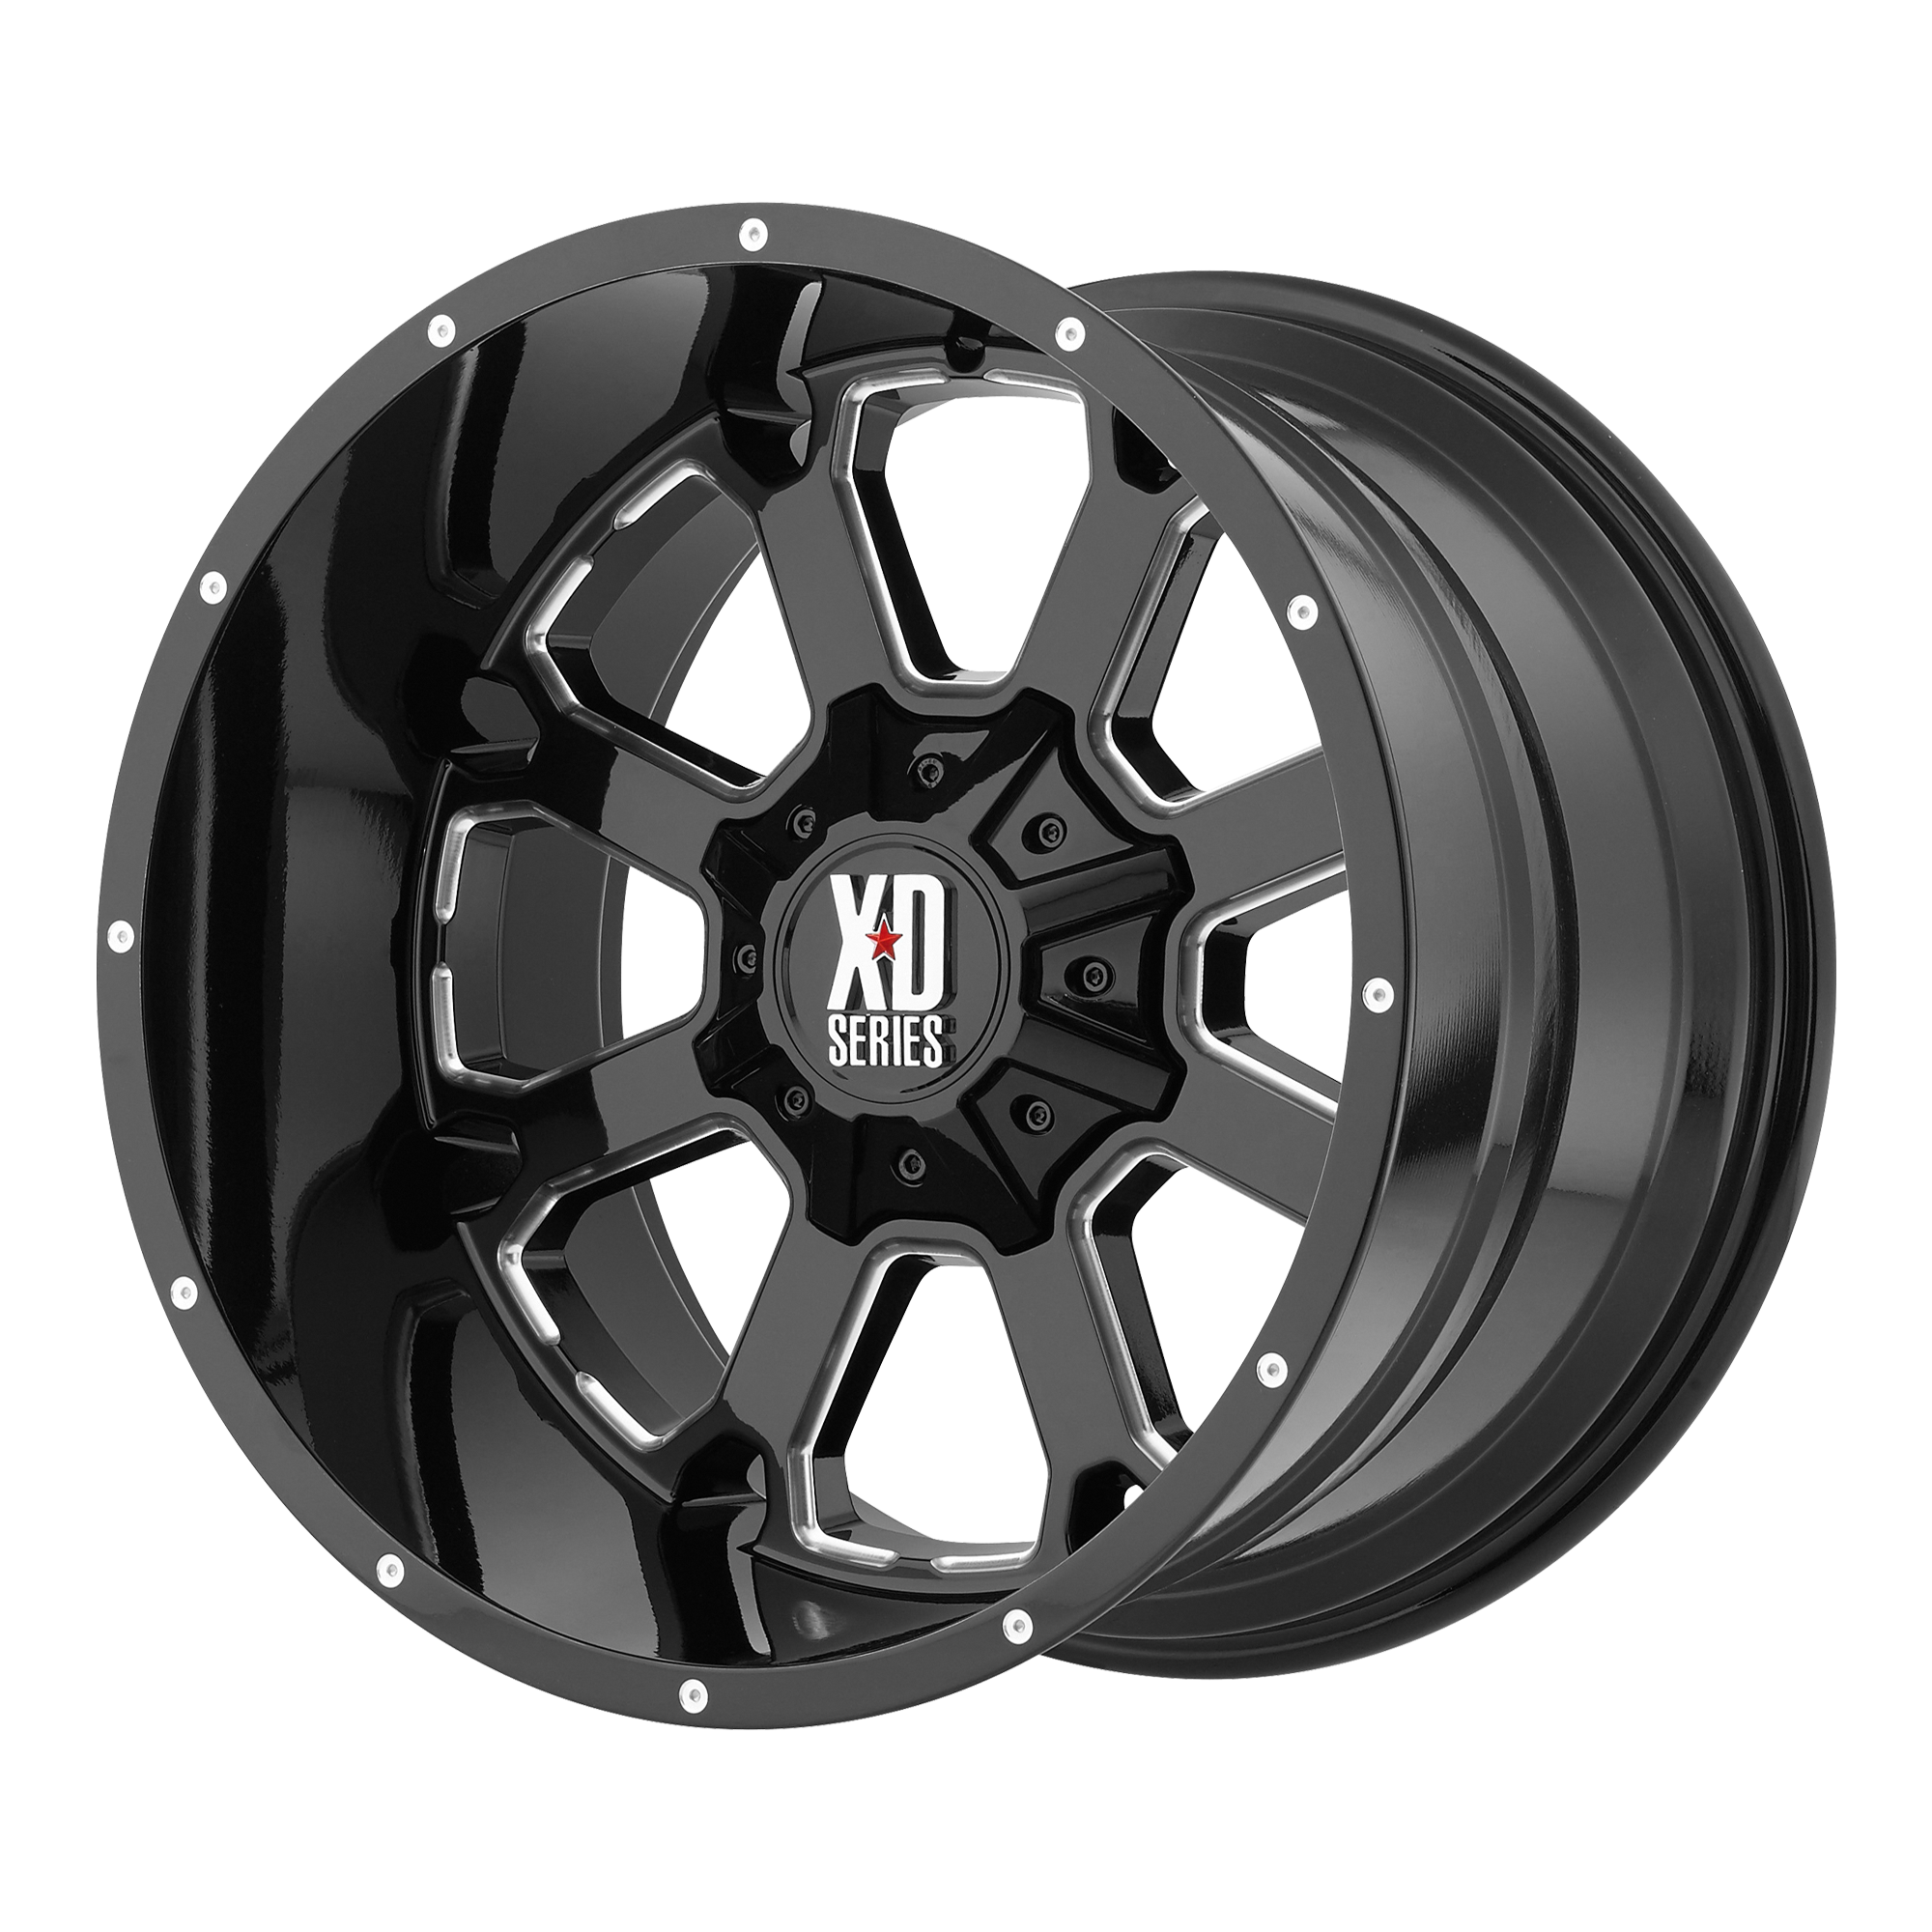 BUCK 25 20x10 8x170.00 GLOSS BLACK MILLED (-24 mm) - Tires and Engine Performance